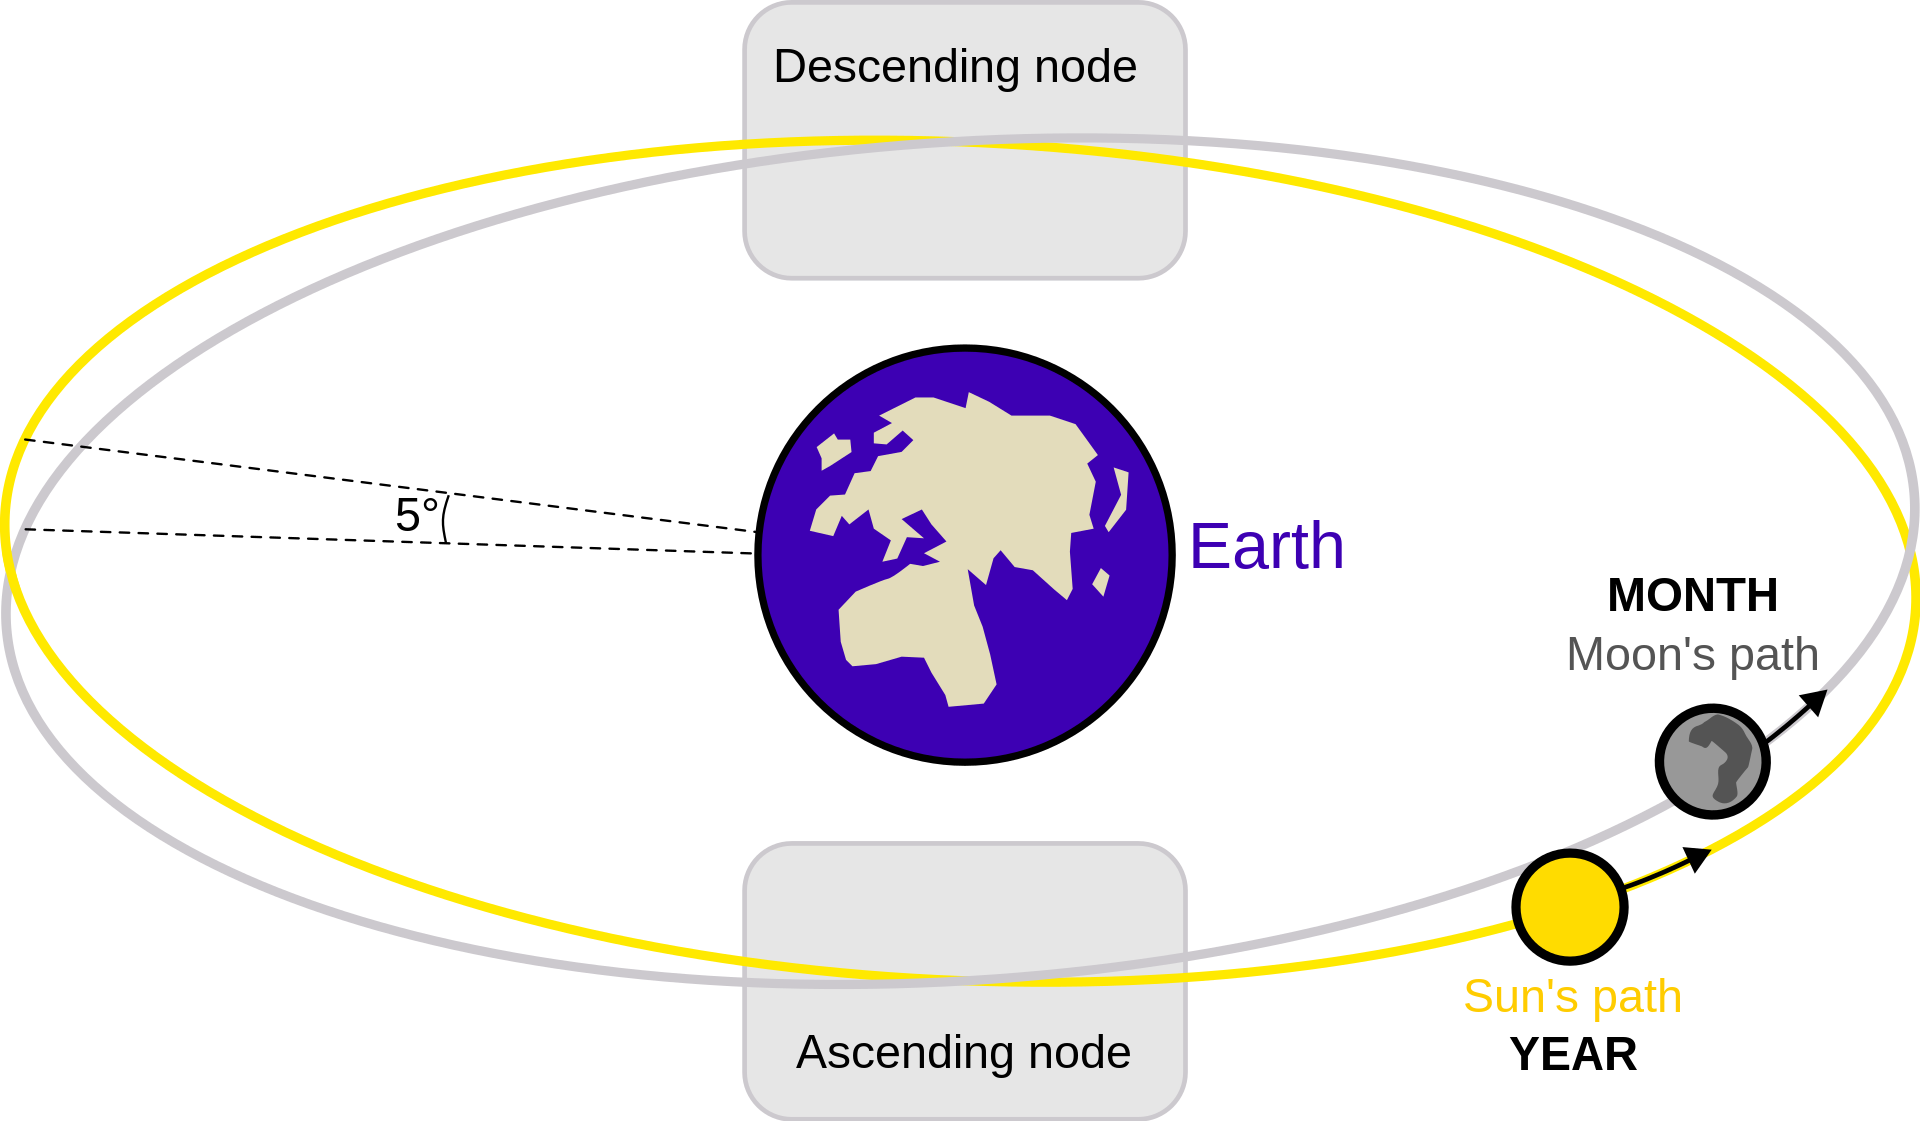 Depiction of the Lunar Nodes of how the Ascending and Descending nodes in comparison to the pathway of the lunar path to the Sun